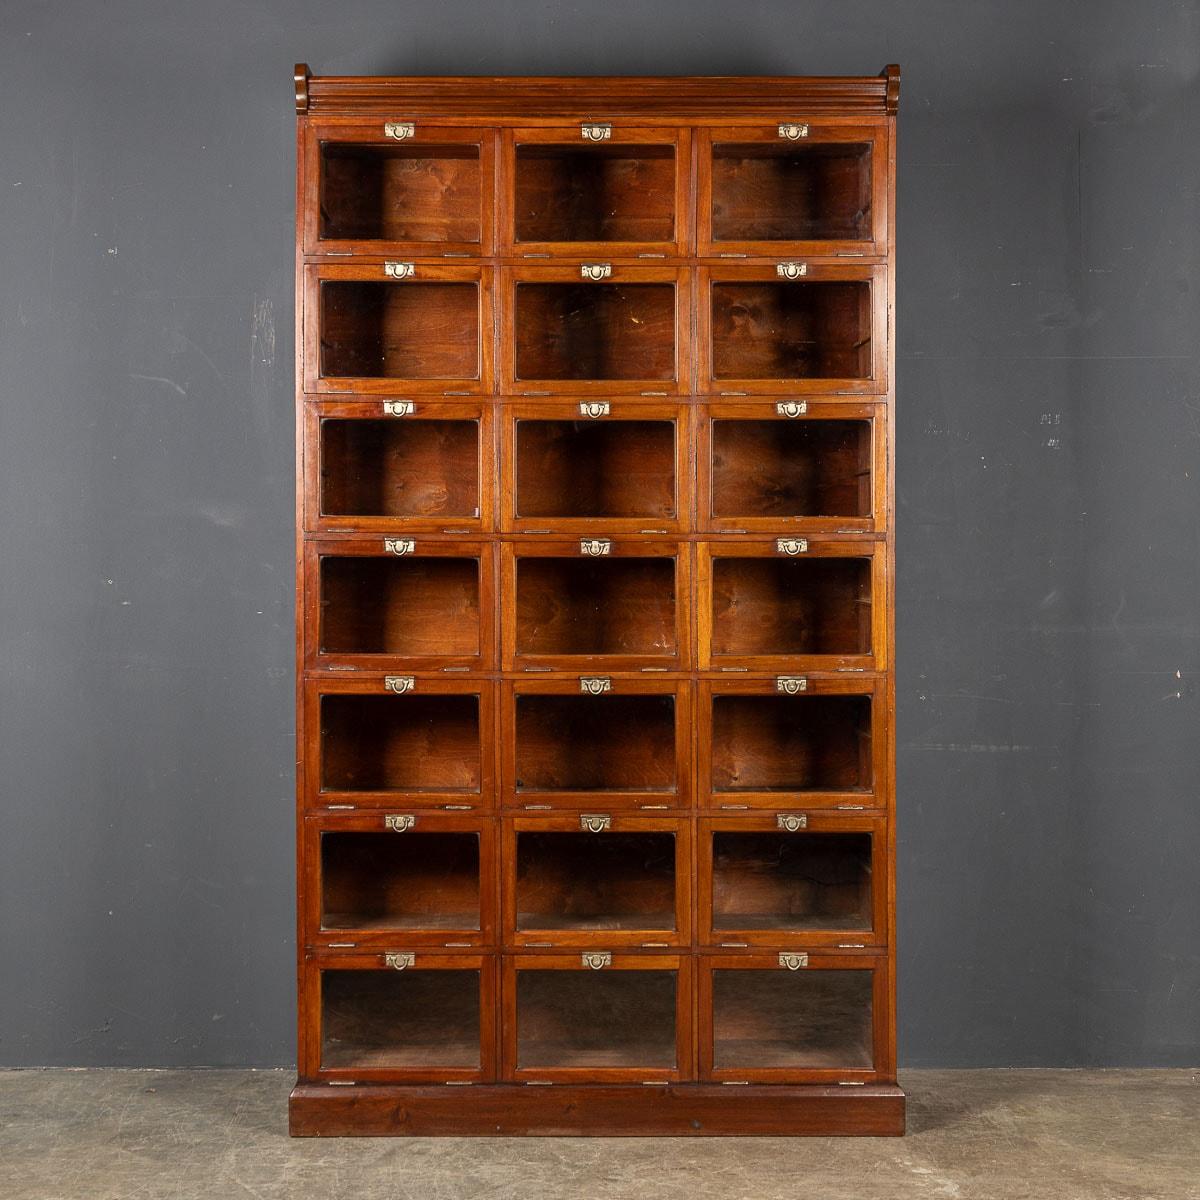 A 1930s mahogany haberdashery with twenty one drop front glass doors each with original brass catches a stunning high quality piece. A very practical and a truly wonderful conversation piece capable of transporting the imagination to a bygone